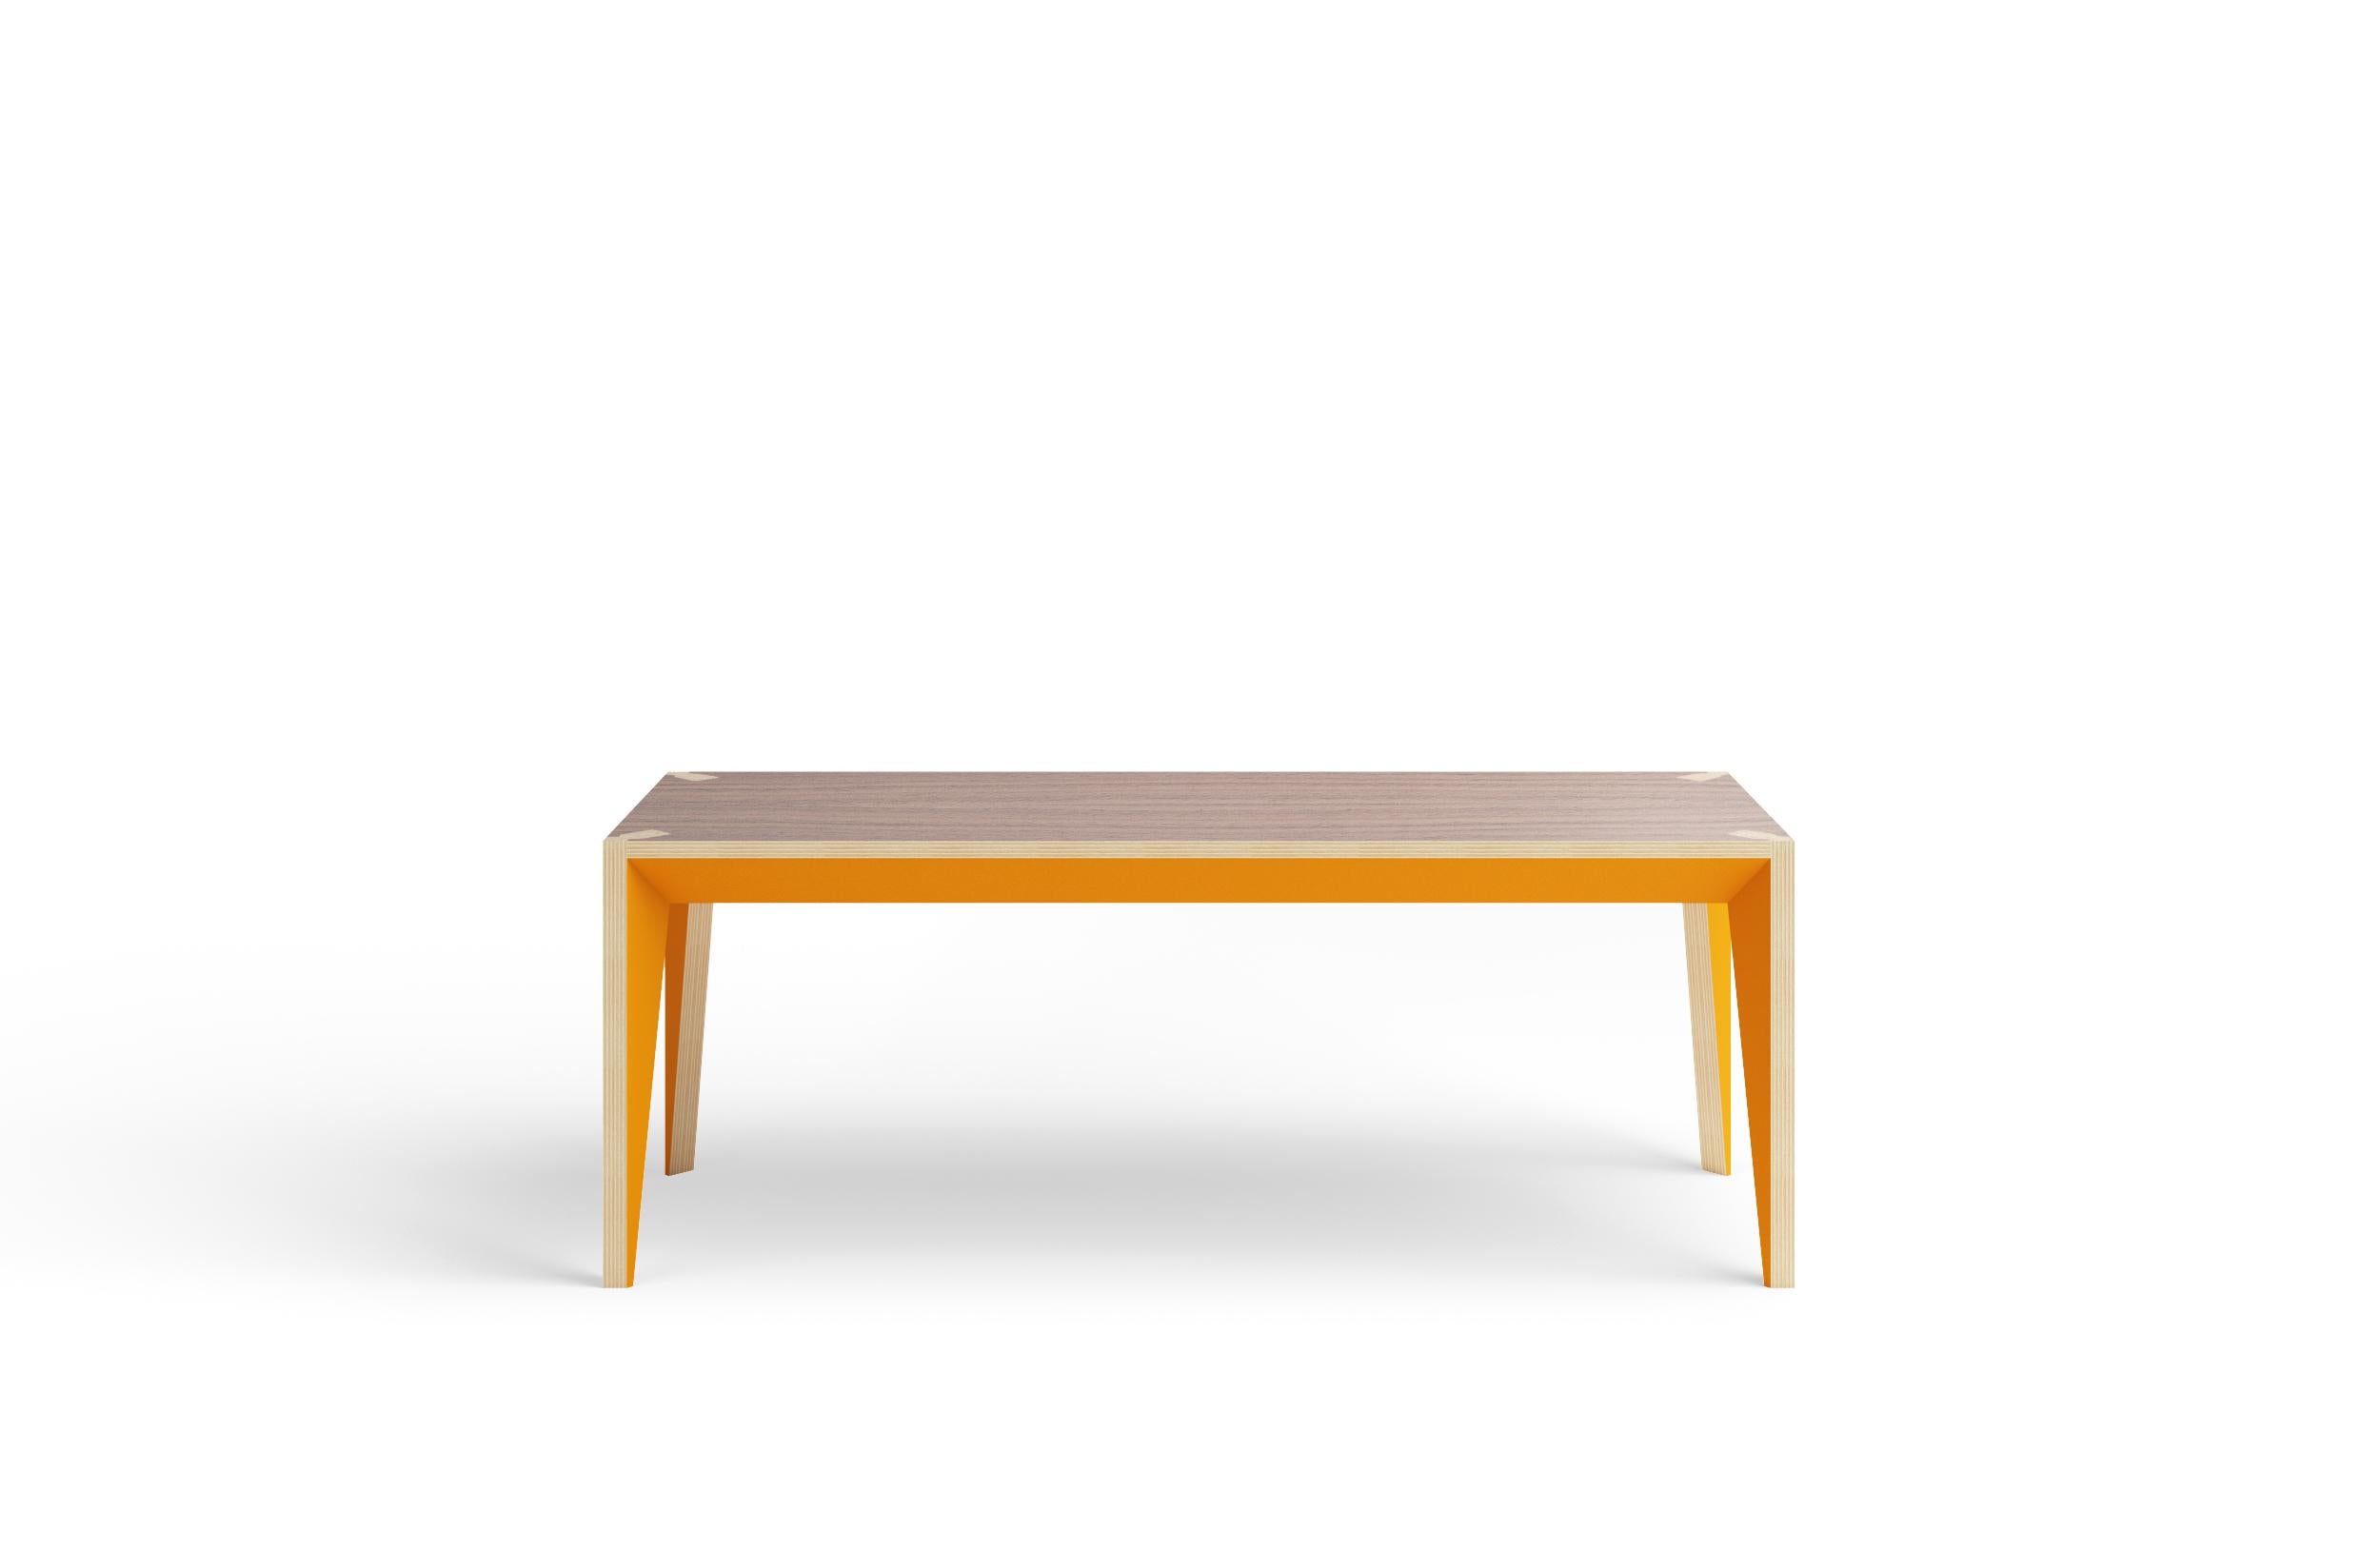 This versatile and essential bench is both iconic and minimal. The painted facets of its angular geometry capture the ever-changing gradients of light. The legs interlock into the notched top to create a beautiful joinery detail and sturdy